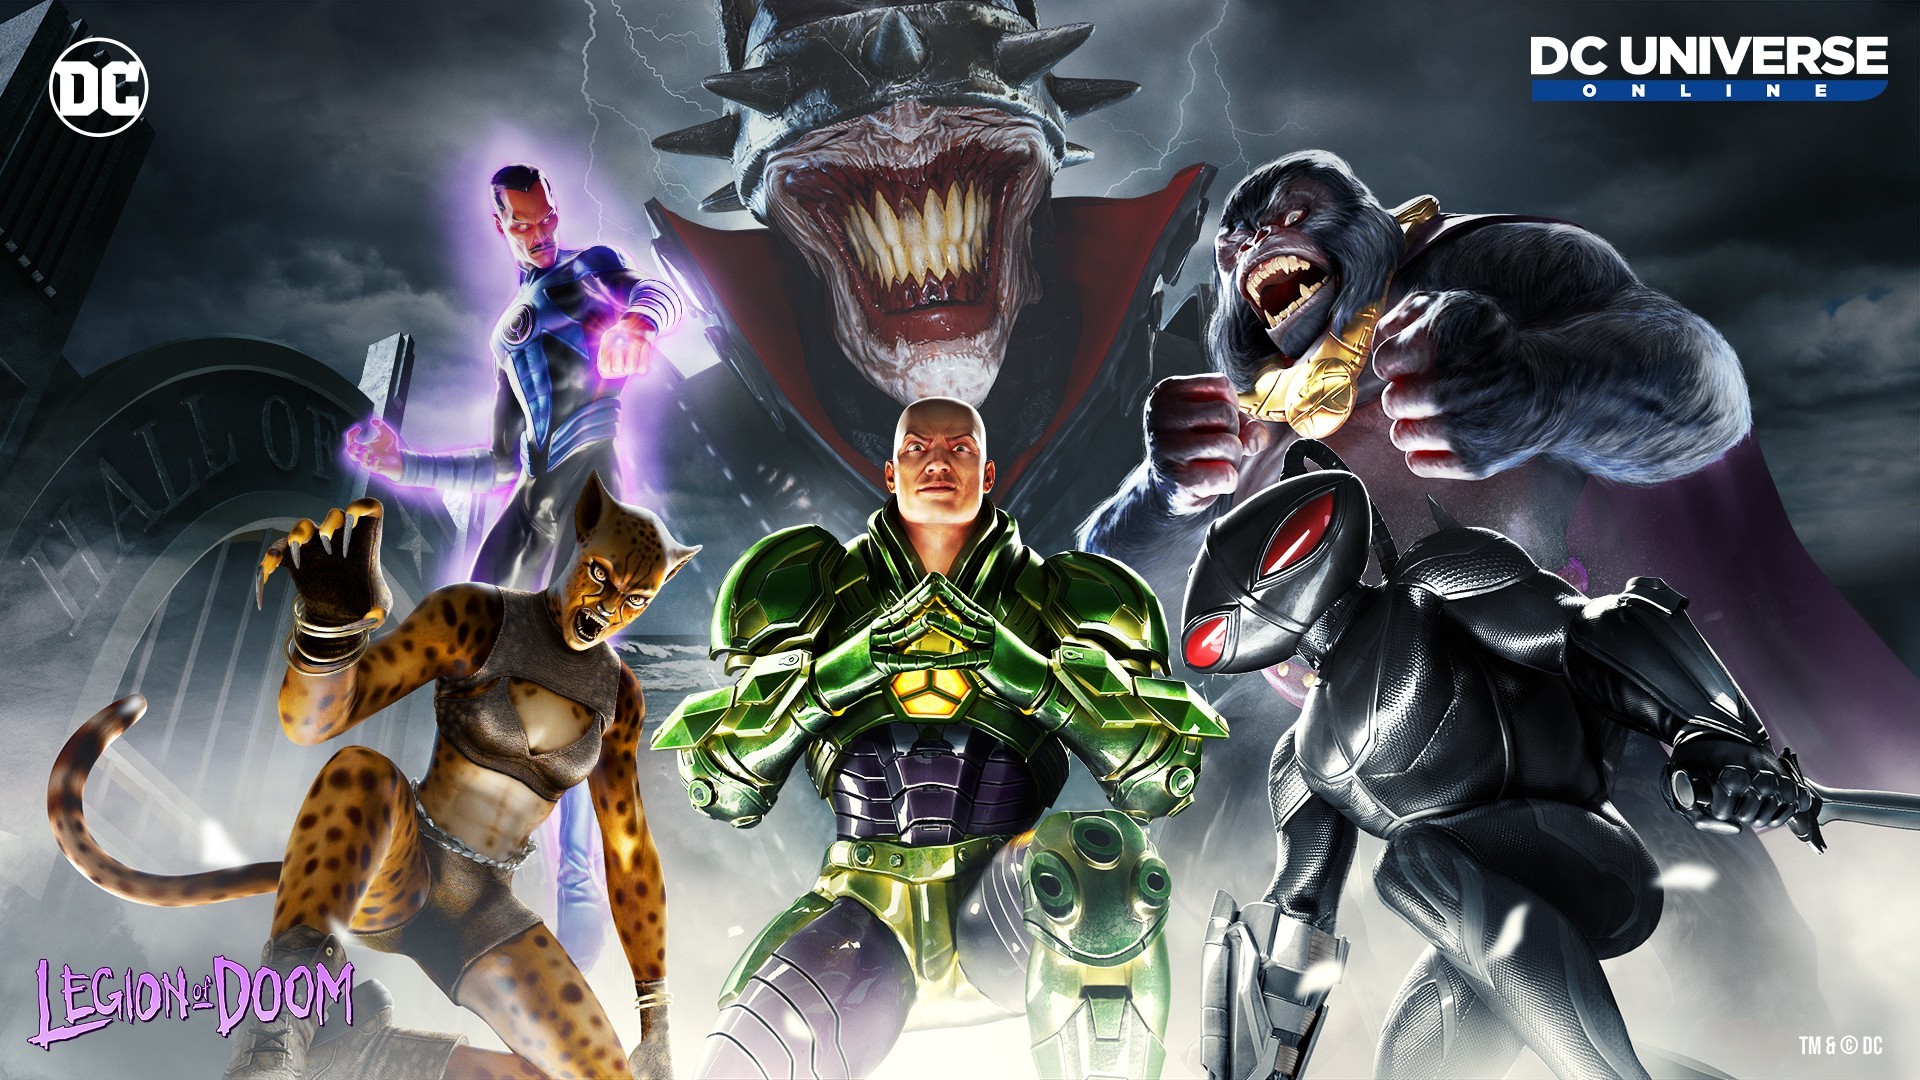 Video For The Legion of Doom Invades DC Universe Online